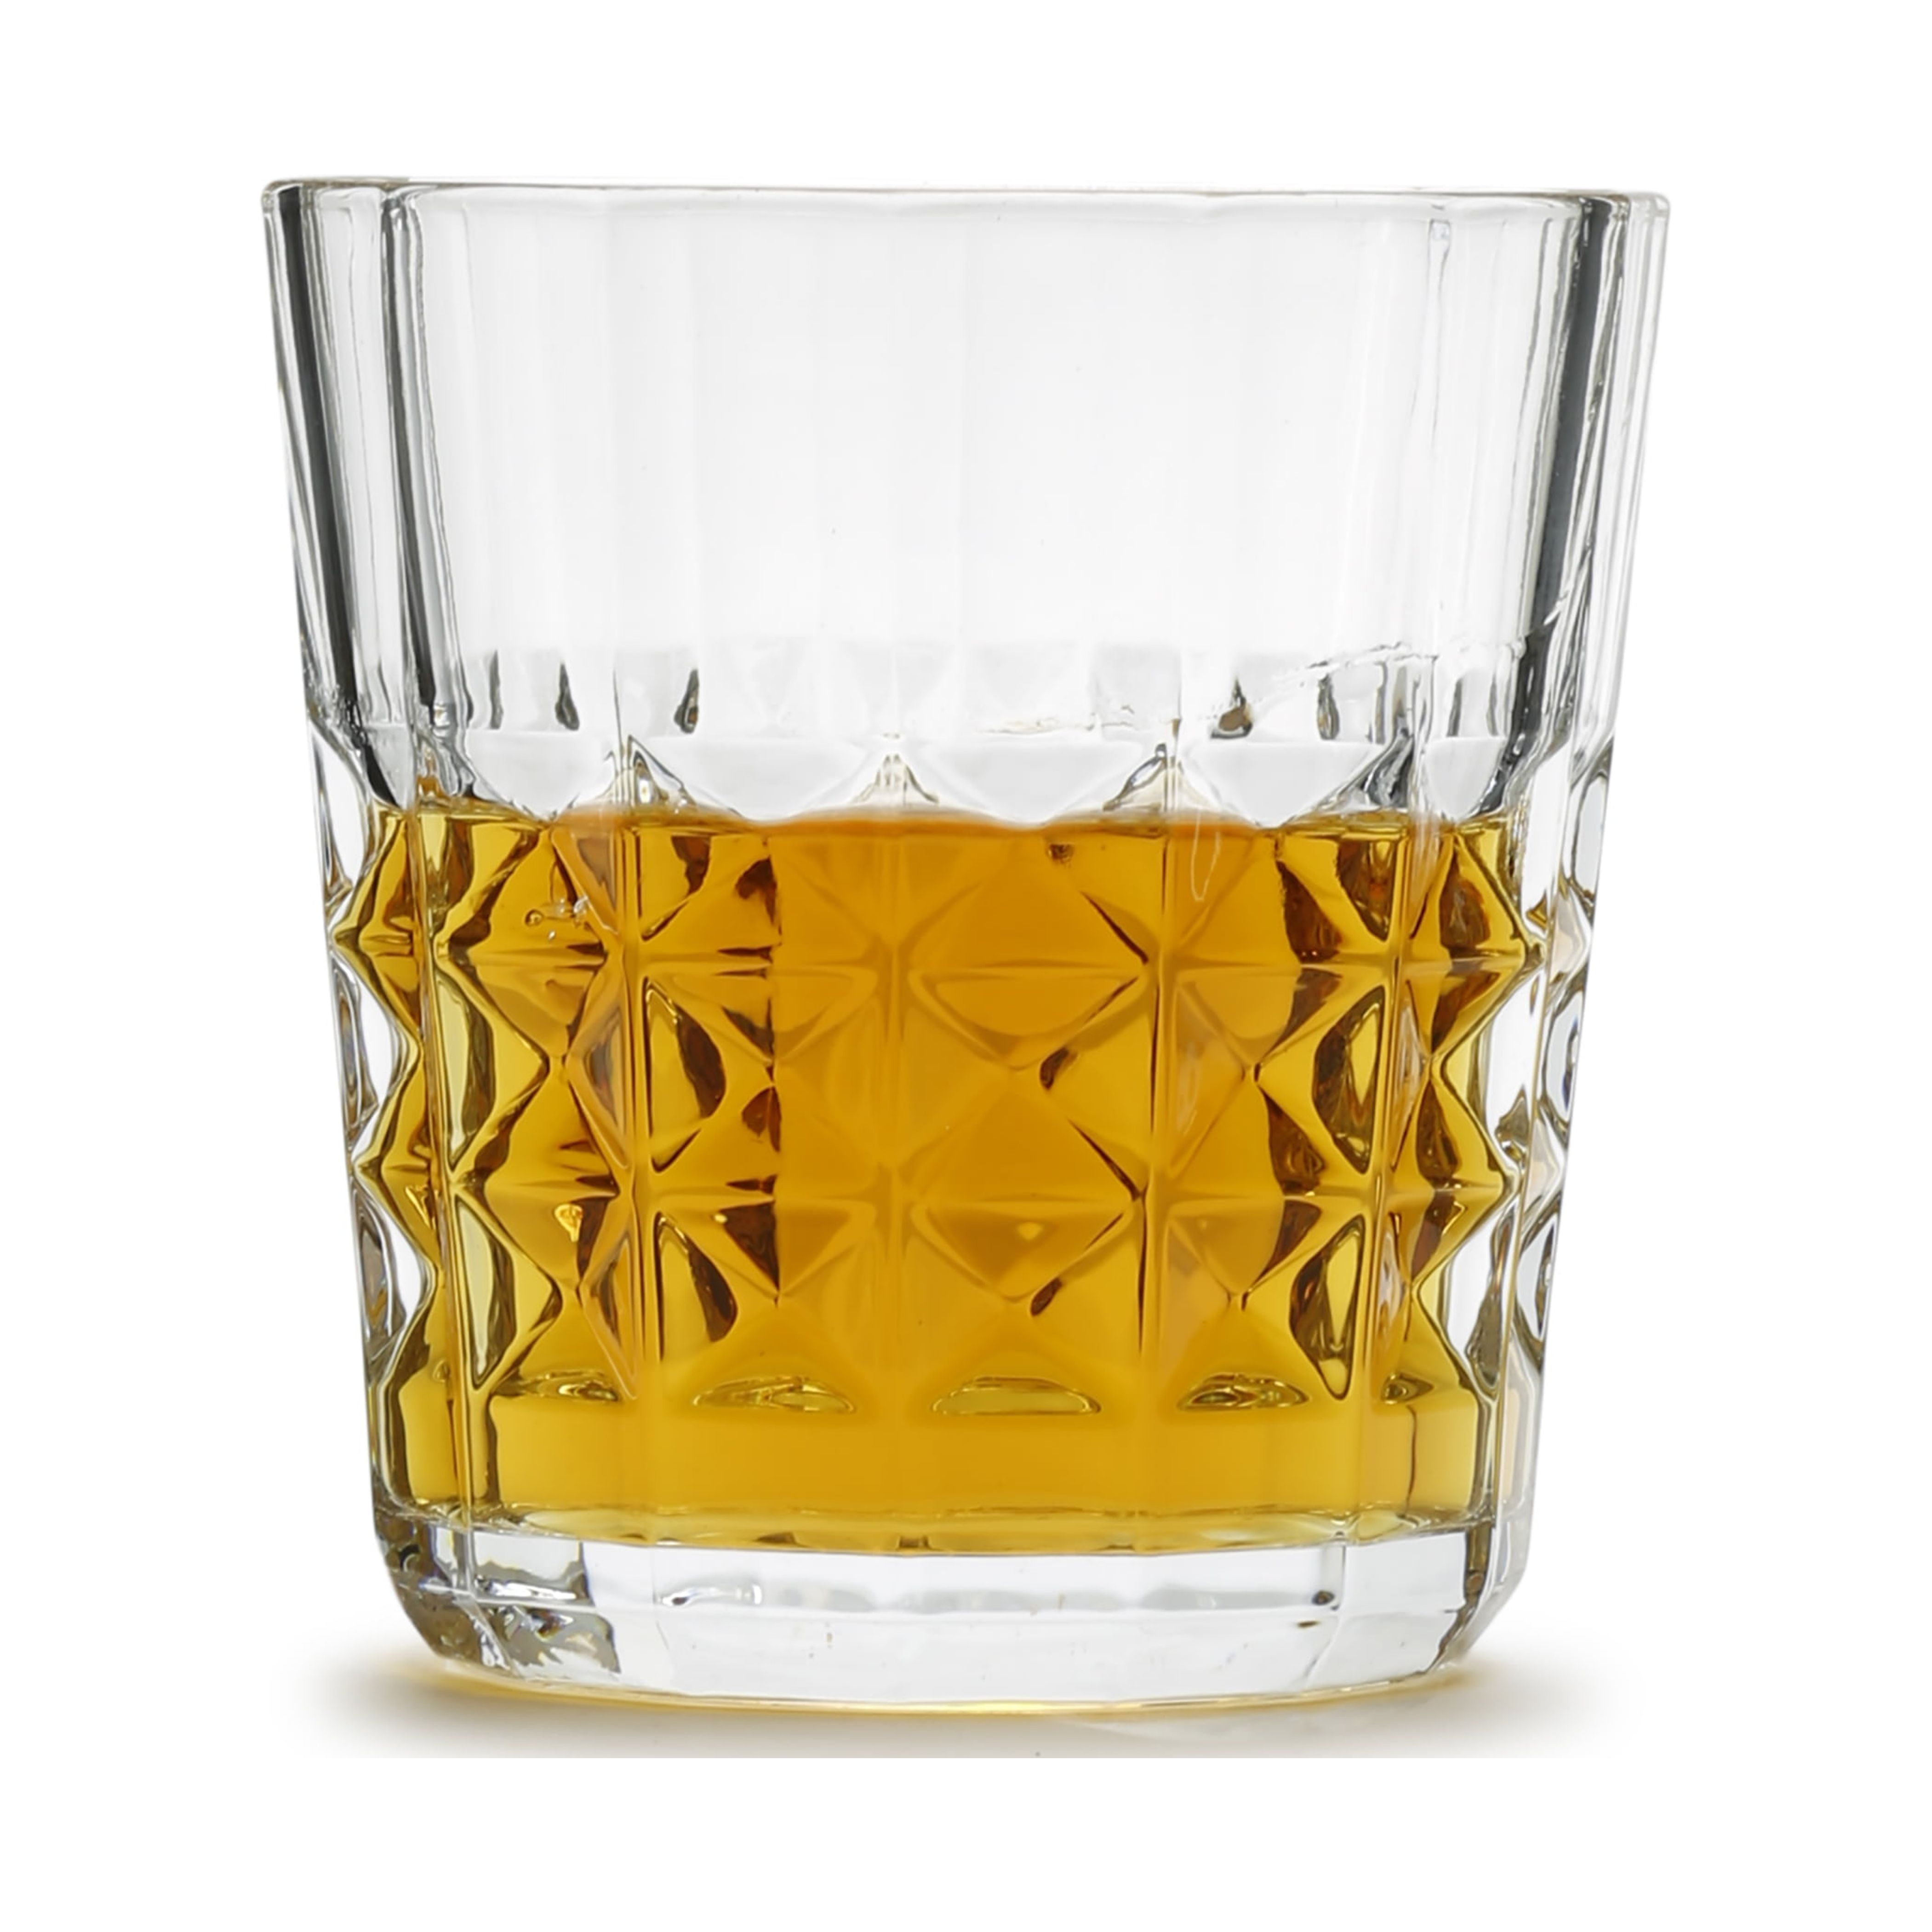 BTäT- Whiskey Glasses, Bourbon Glasses, Set of 4, Double Wall Glasses, Cocktail Glasses, Scotch Glasses, Old Fashioned Glass, Rocks Glass, Crystal